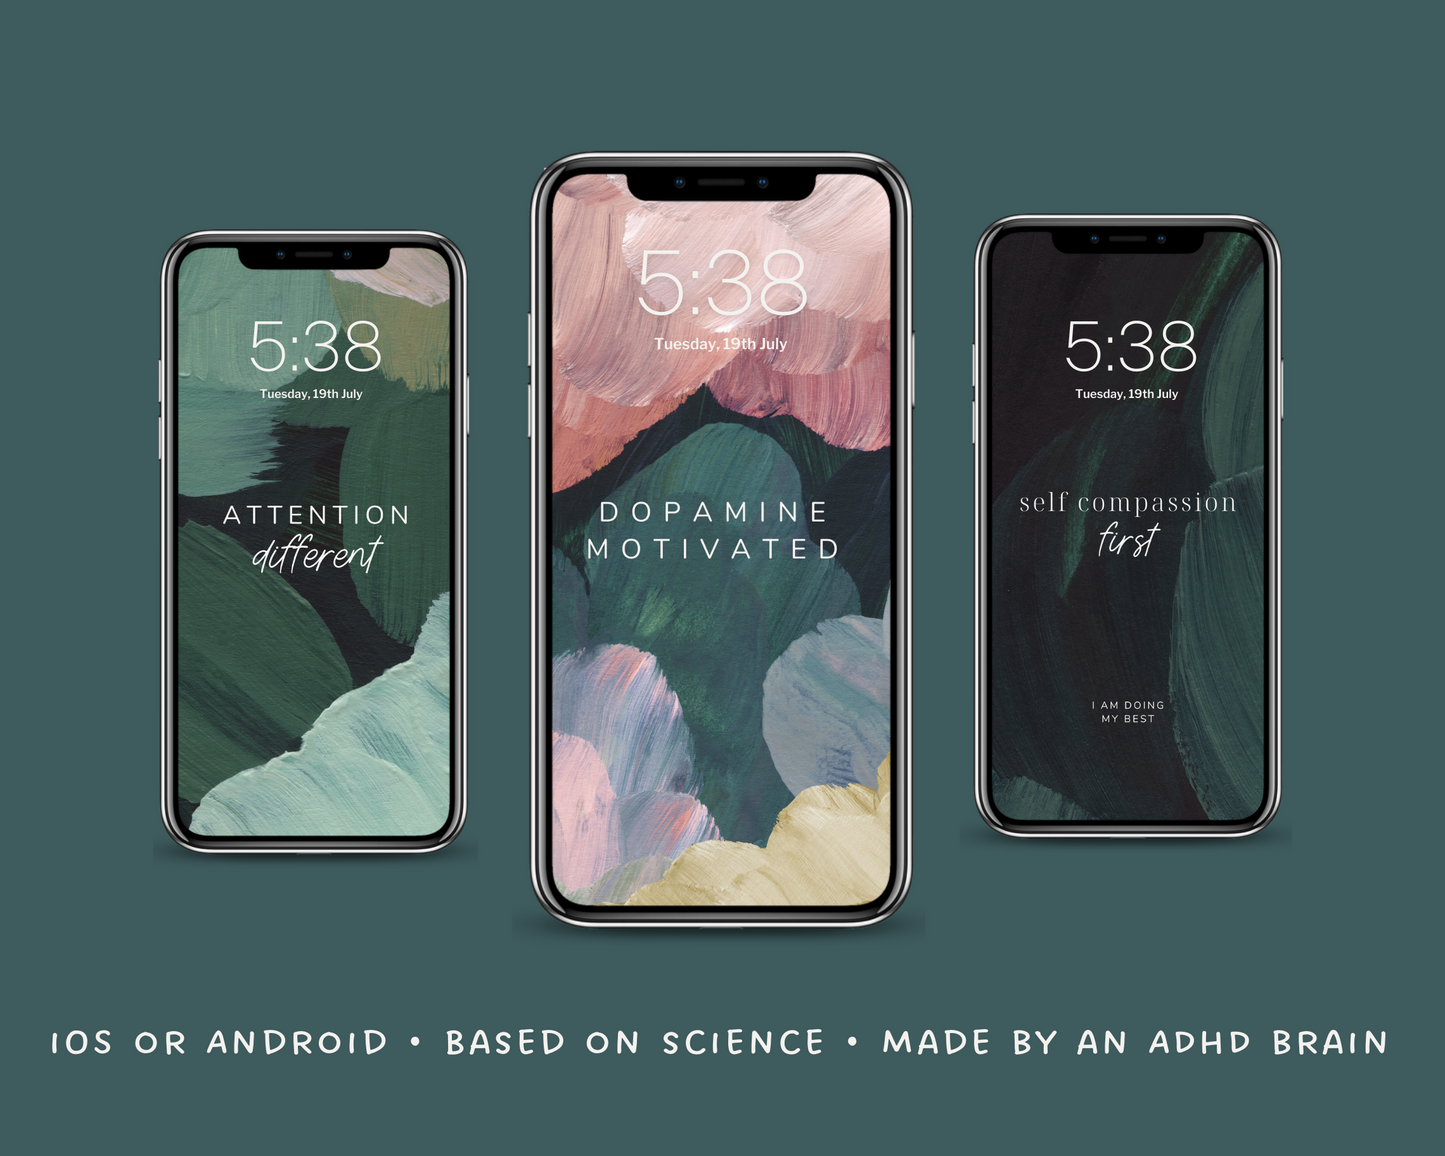 ADHD Phone Wallpapers for iOS or Android smartphones